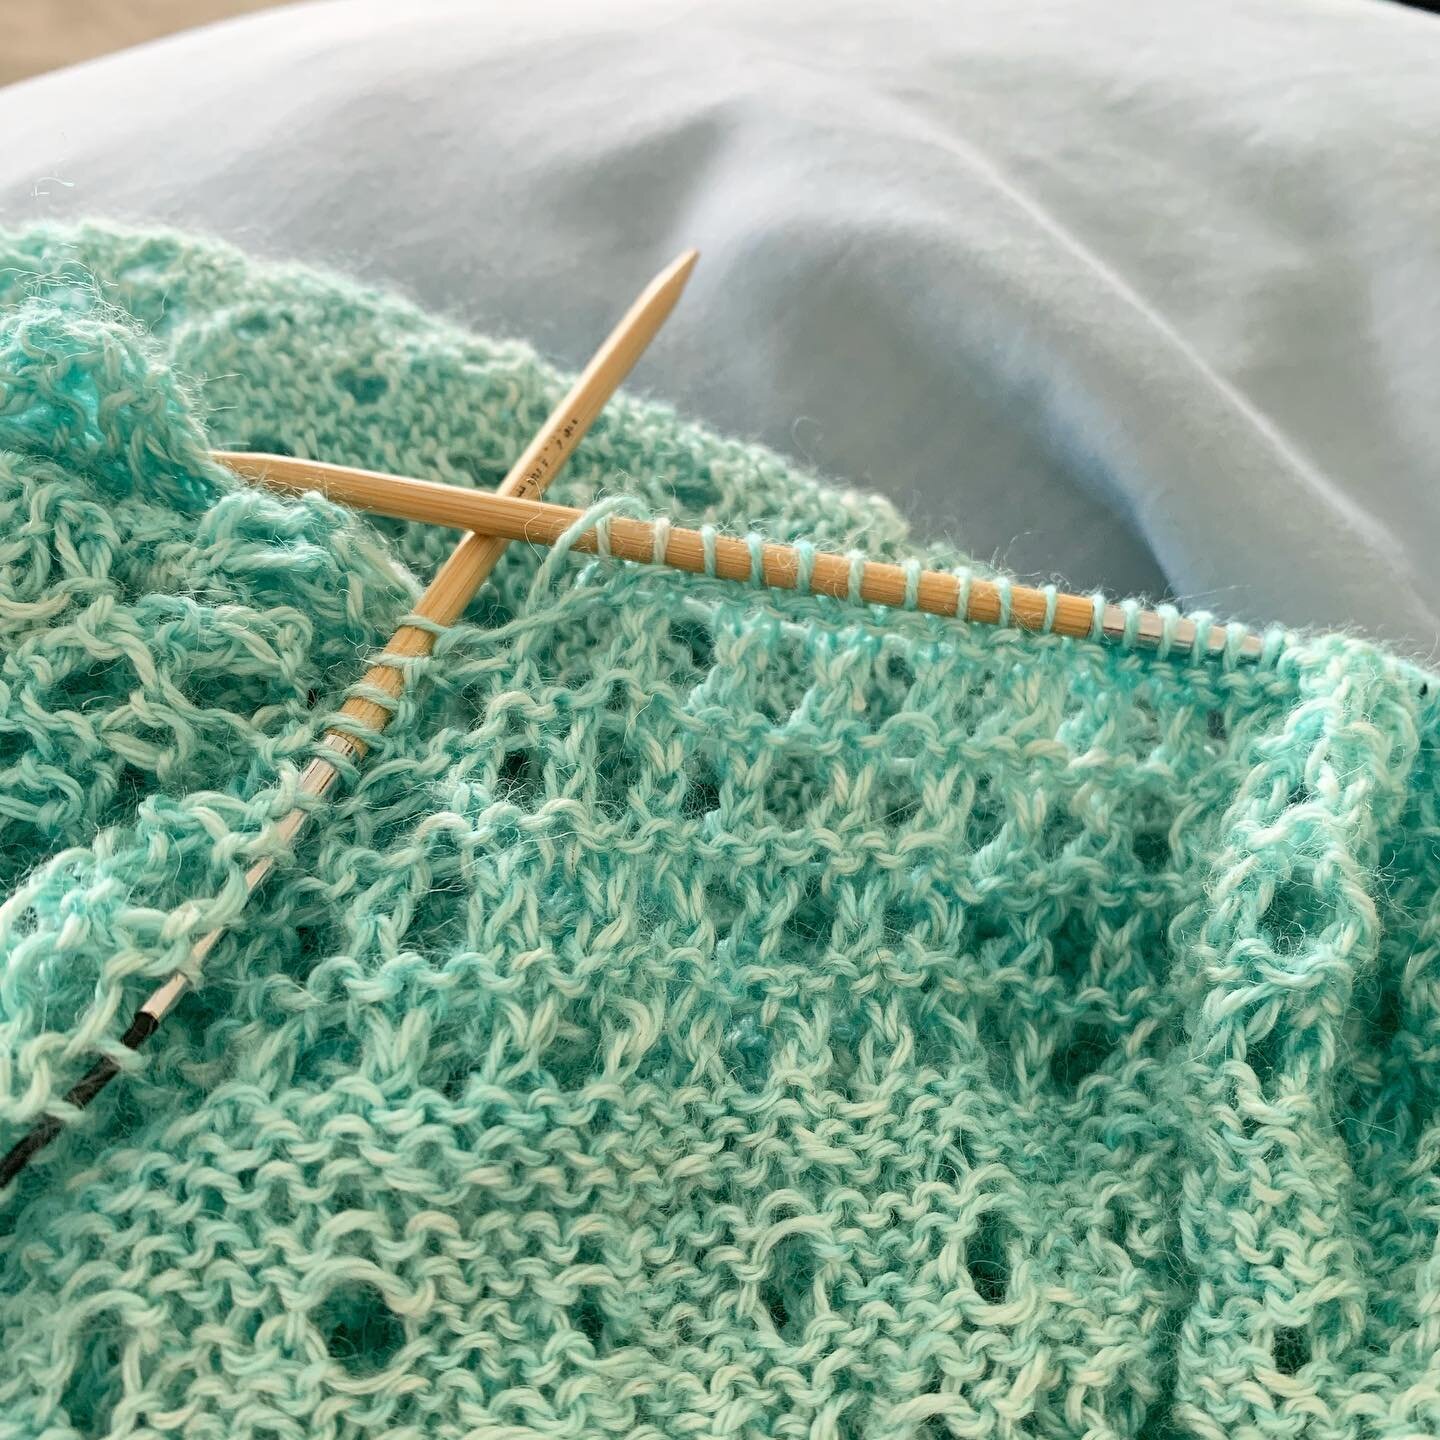 I had major surgery this week and am just now feeling up to knitting, ensconced in mounds of blankets and pillows. My hope is to finish my lovely Pebble Beach Shawl with Ginger&rsquo;s Hand Dyed Sweet Flax while I recuperate, just in time to wrap up 